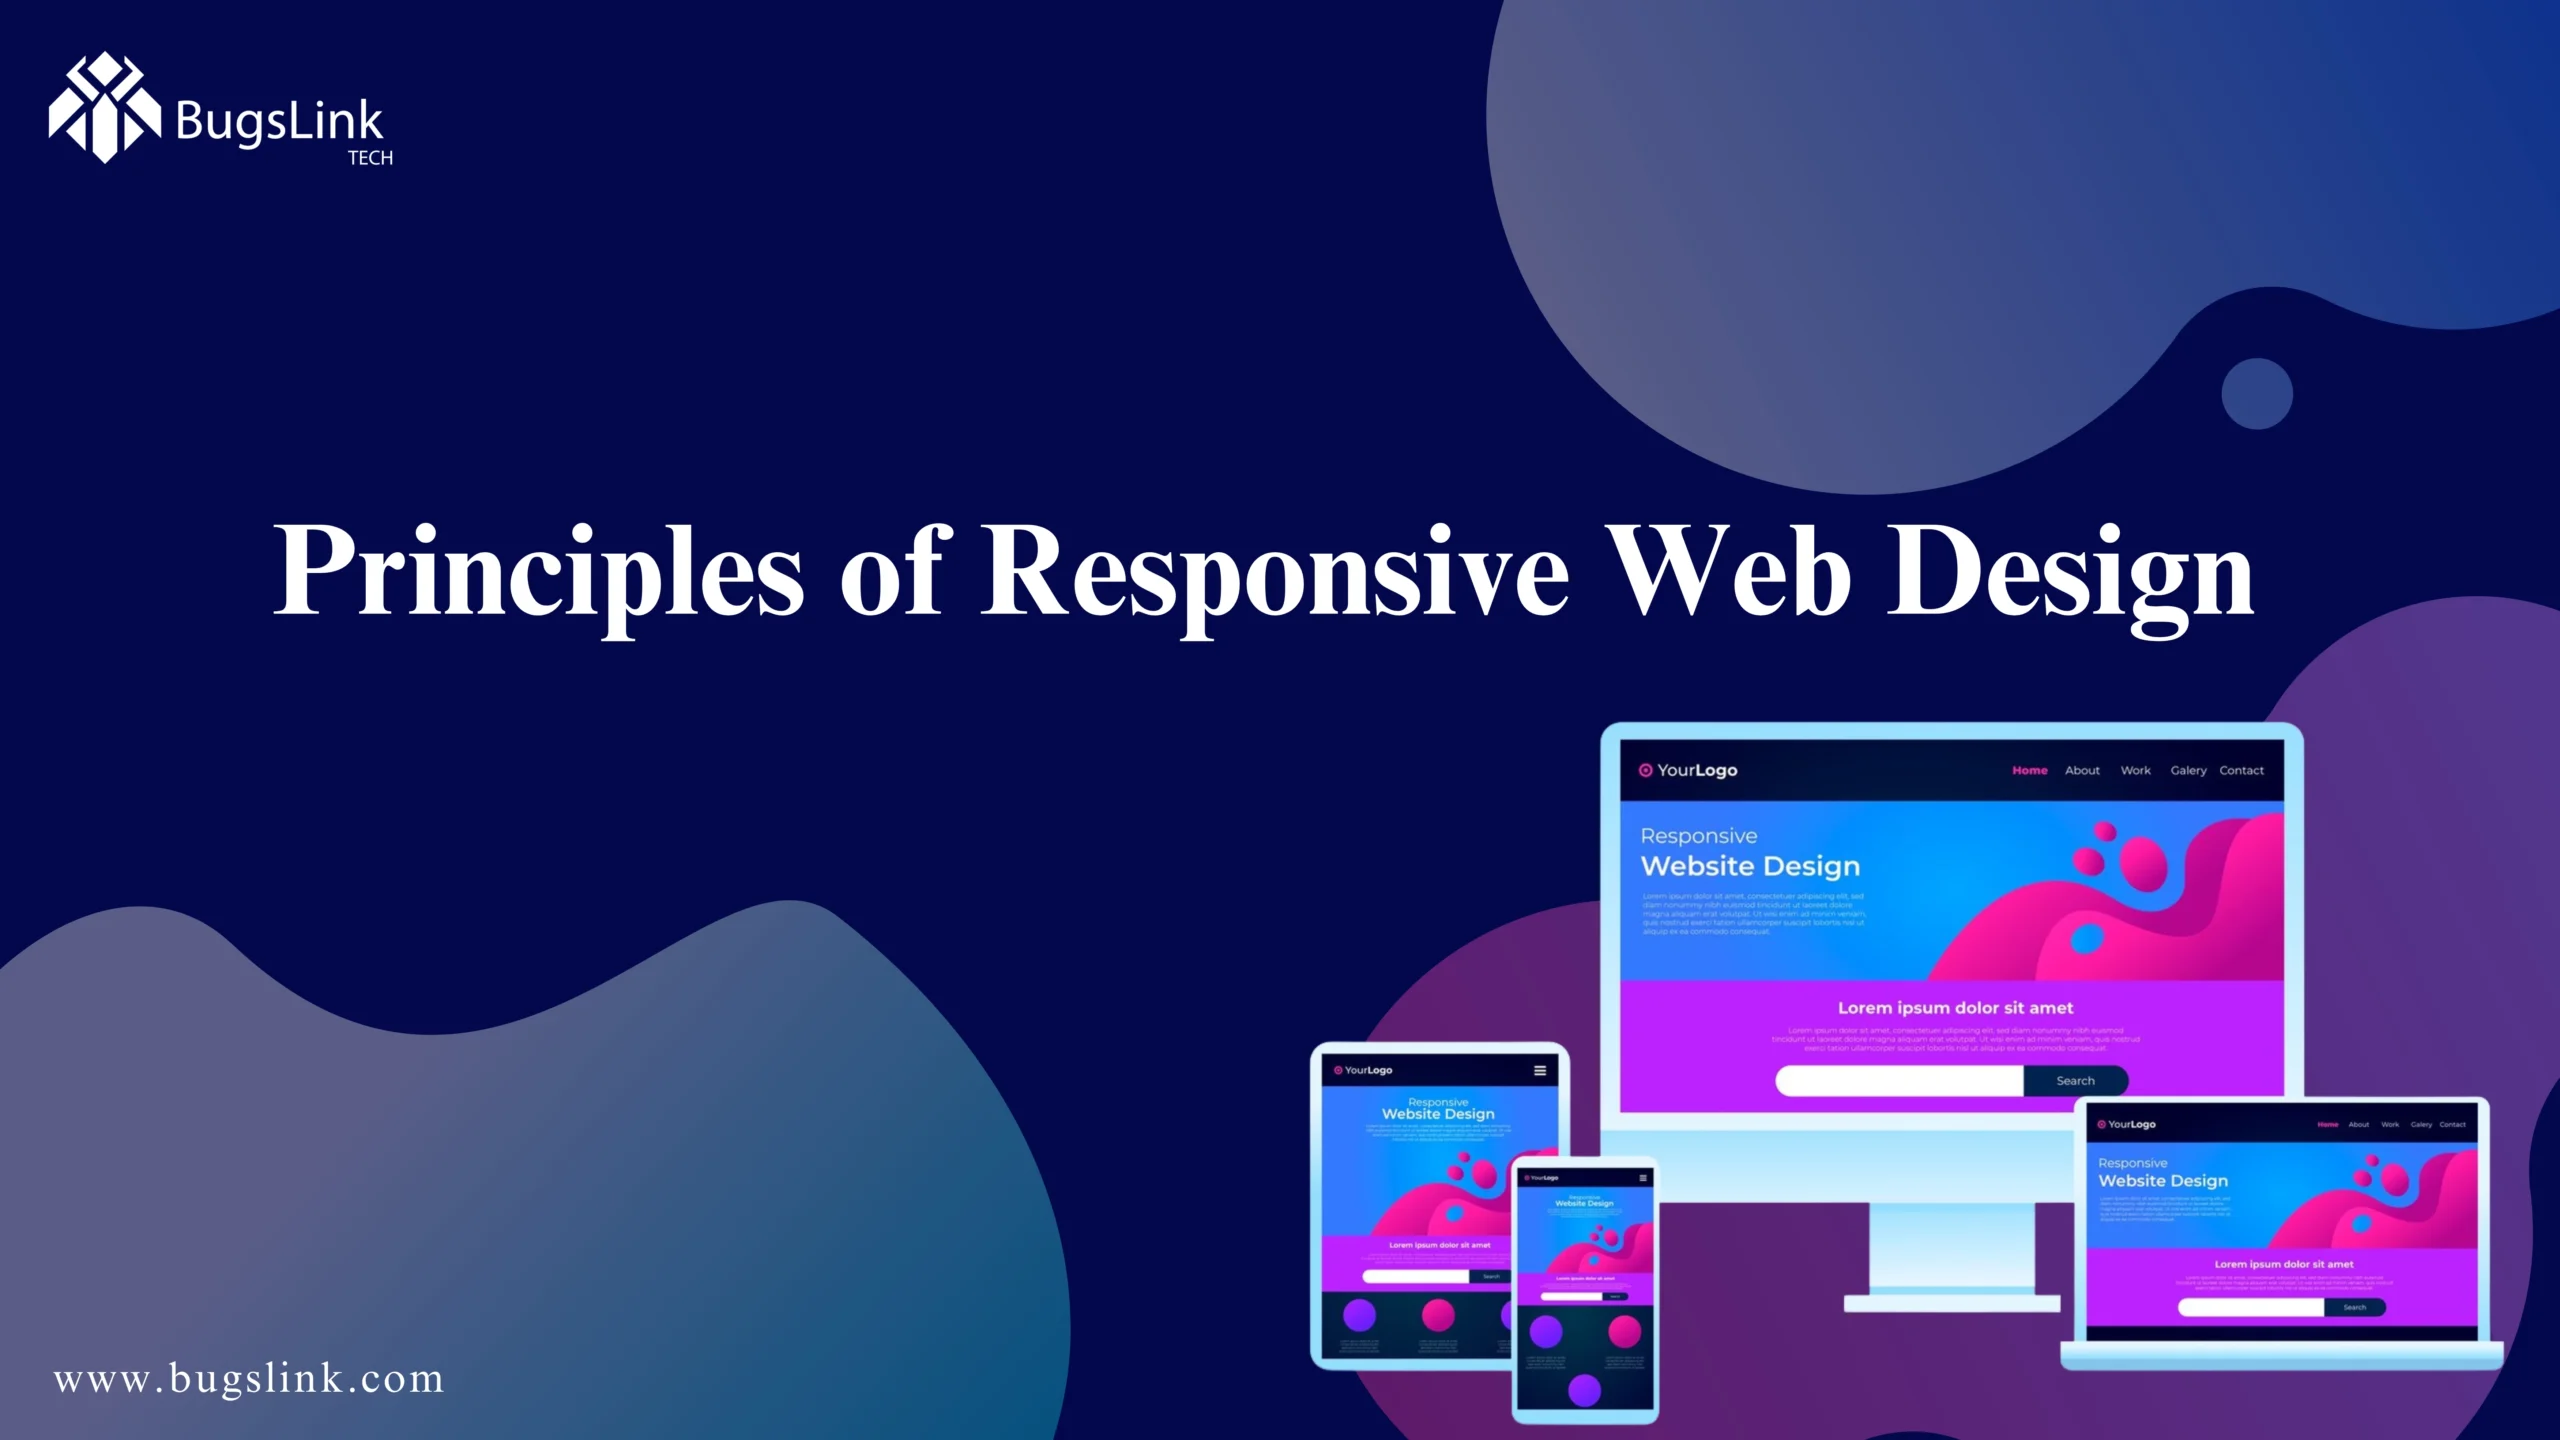 What Are The Basic Web Design Principles